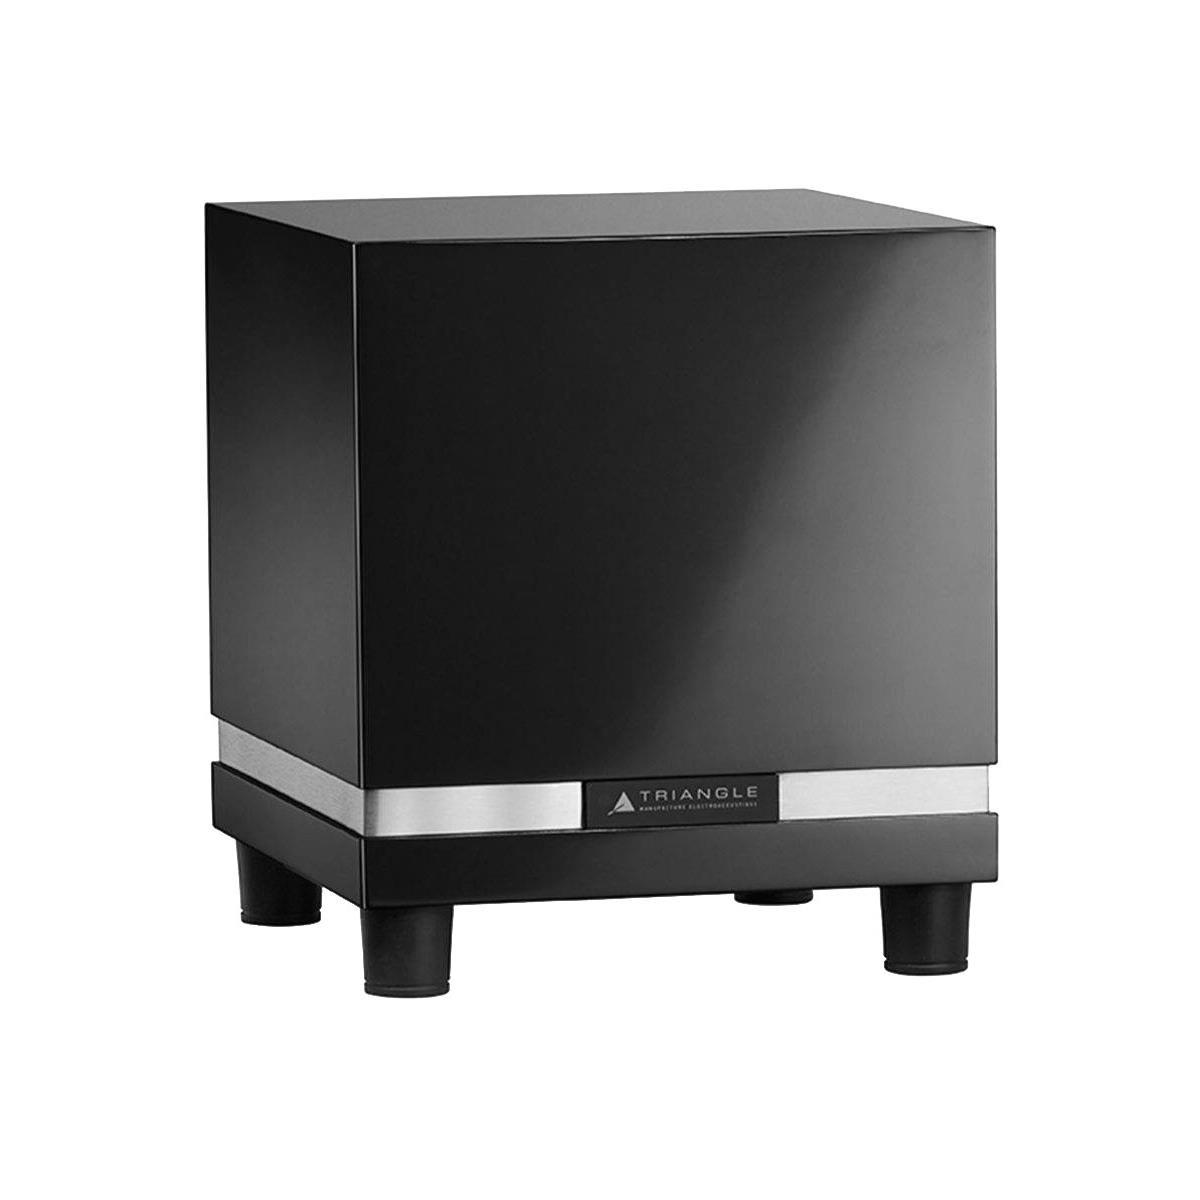 Image of Triangle HiFi Subwoofer - THETIS 280